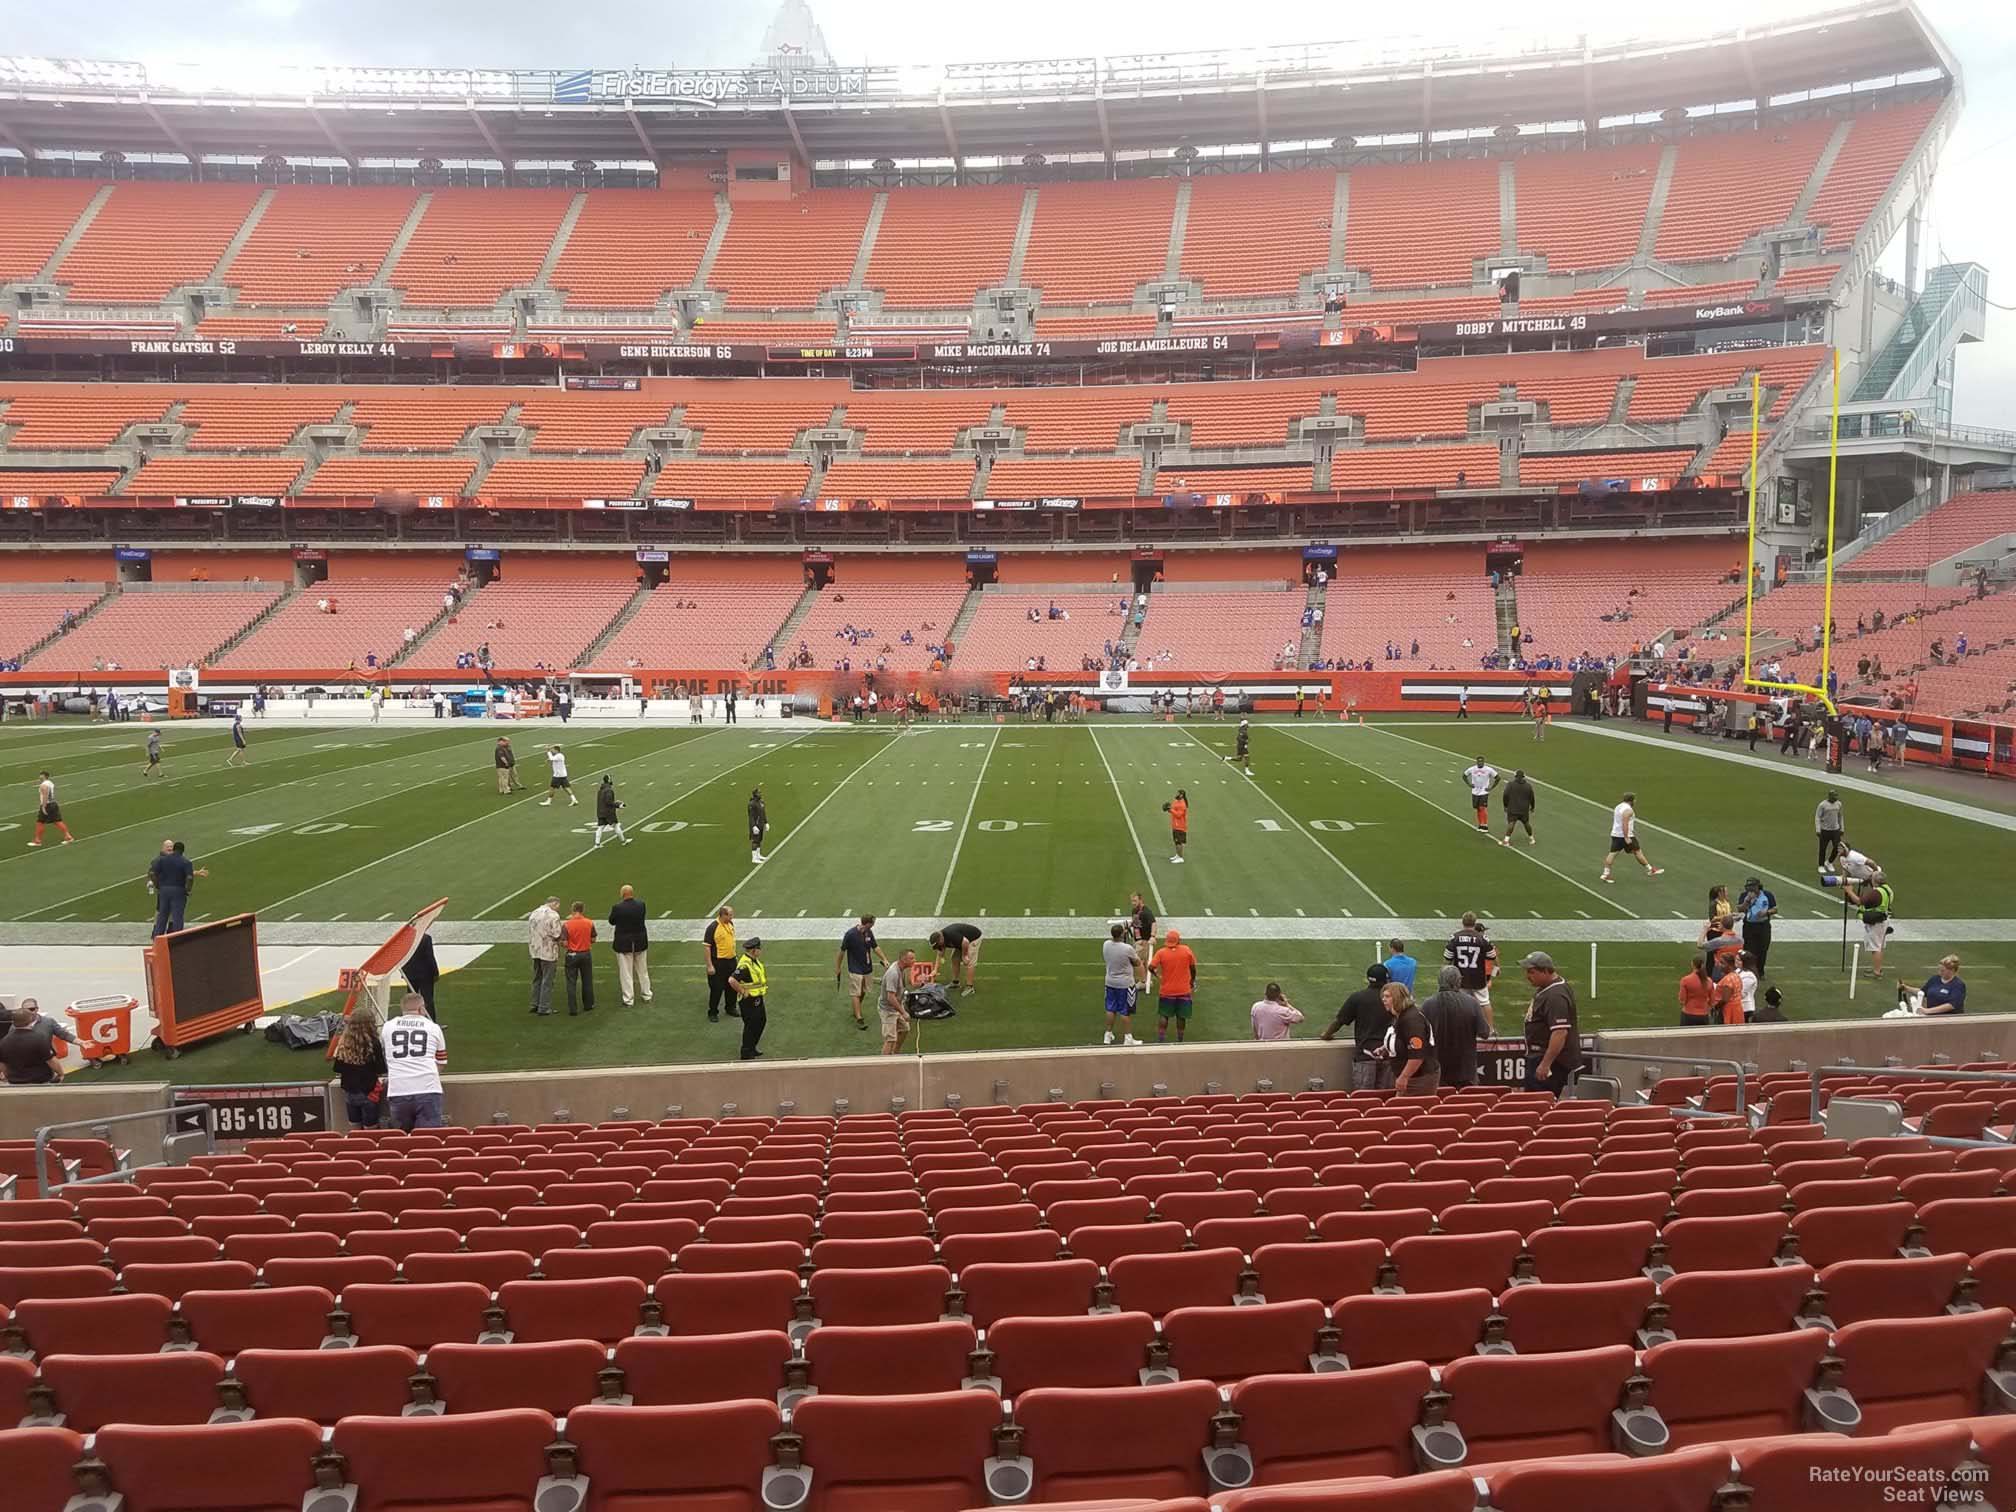 section 136, row 17 seat view  - cleveland browns stadium